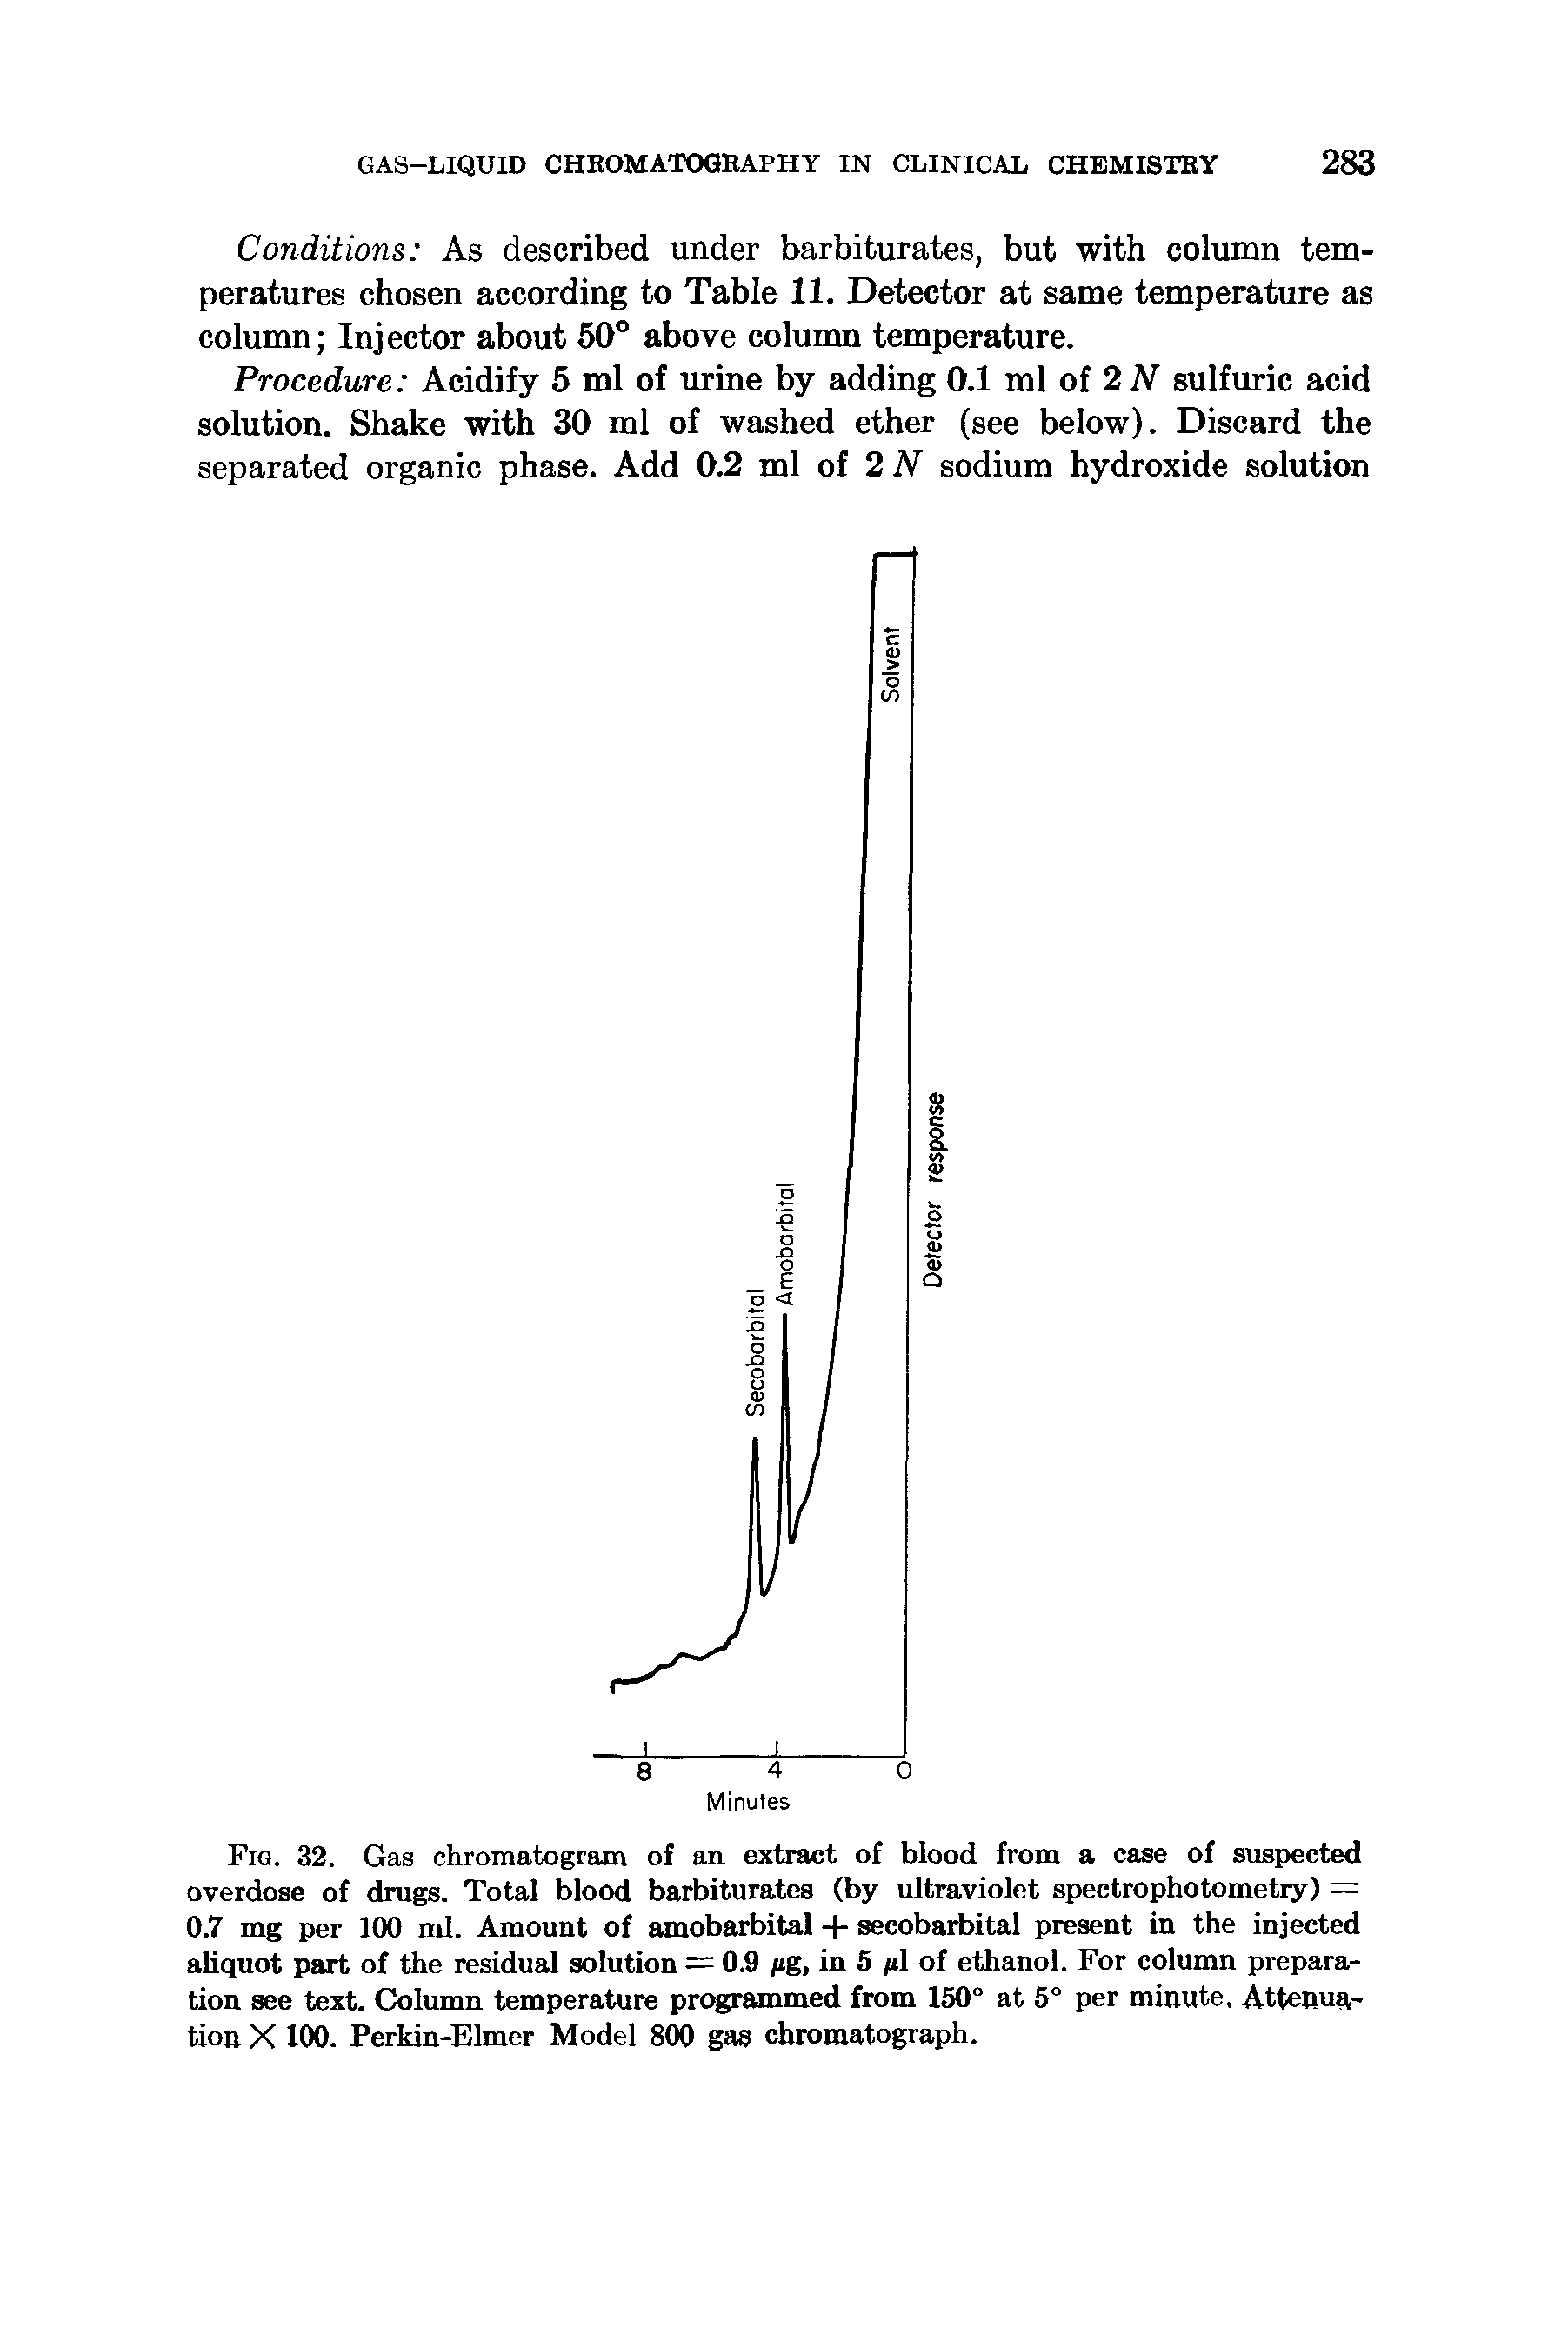 Fig. 32. Gas chromatogram of an extract of blood from a case of suspected overdose of drugs. Total blood barbiturates (by ultraviolet spectrophotometry) = 0.7 mg per 100 ml. Amount of amobarbital + secobarbital present in the injected aliquot part of the residual solution = 0.9 jag, in 5 /rl of ethanol. For column preparation see text. Column temperature prt rammed from 150 at 5 per minute. Attenuation X 100. Perkin-Elmer Model 800 gas chromatograph.